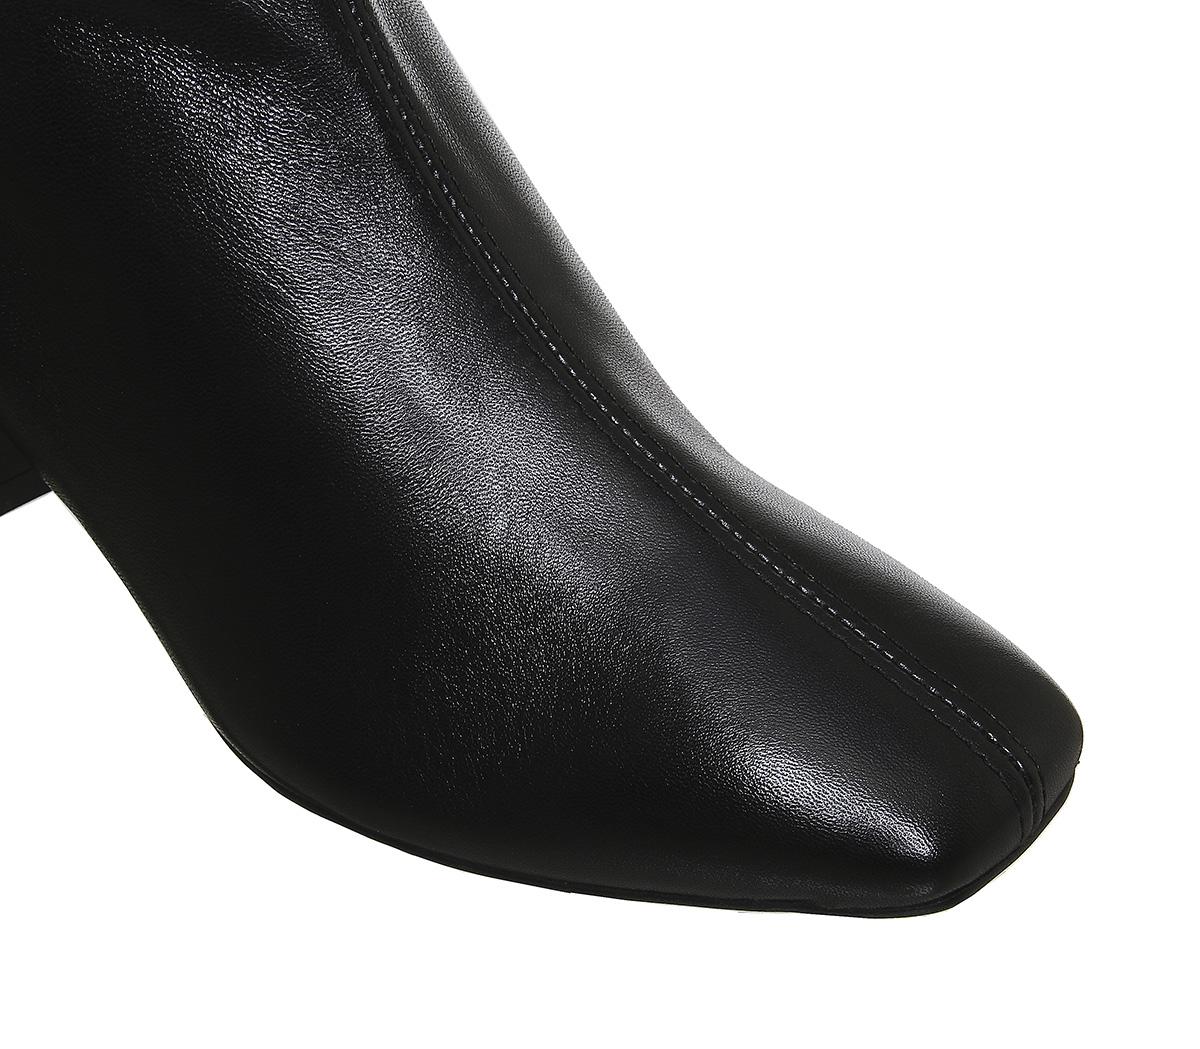 OFFICE Aloof Smart Boots Black Leather - Women's Ankle Boots